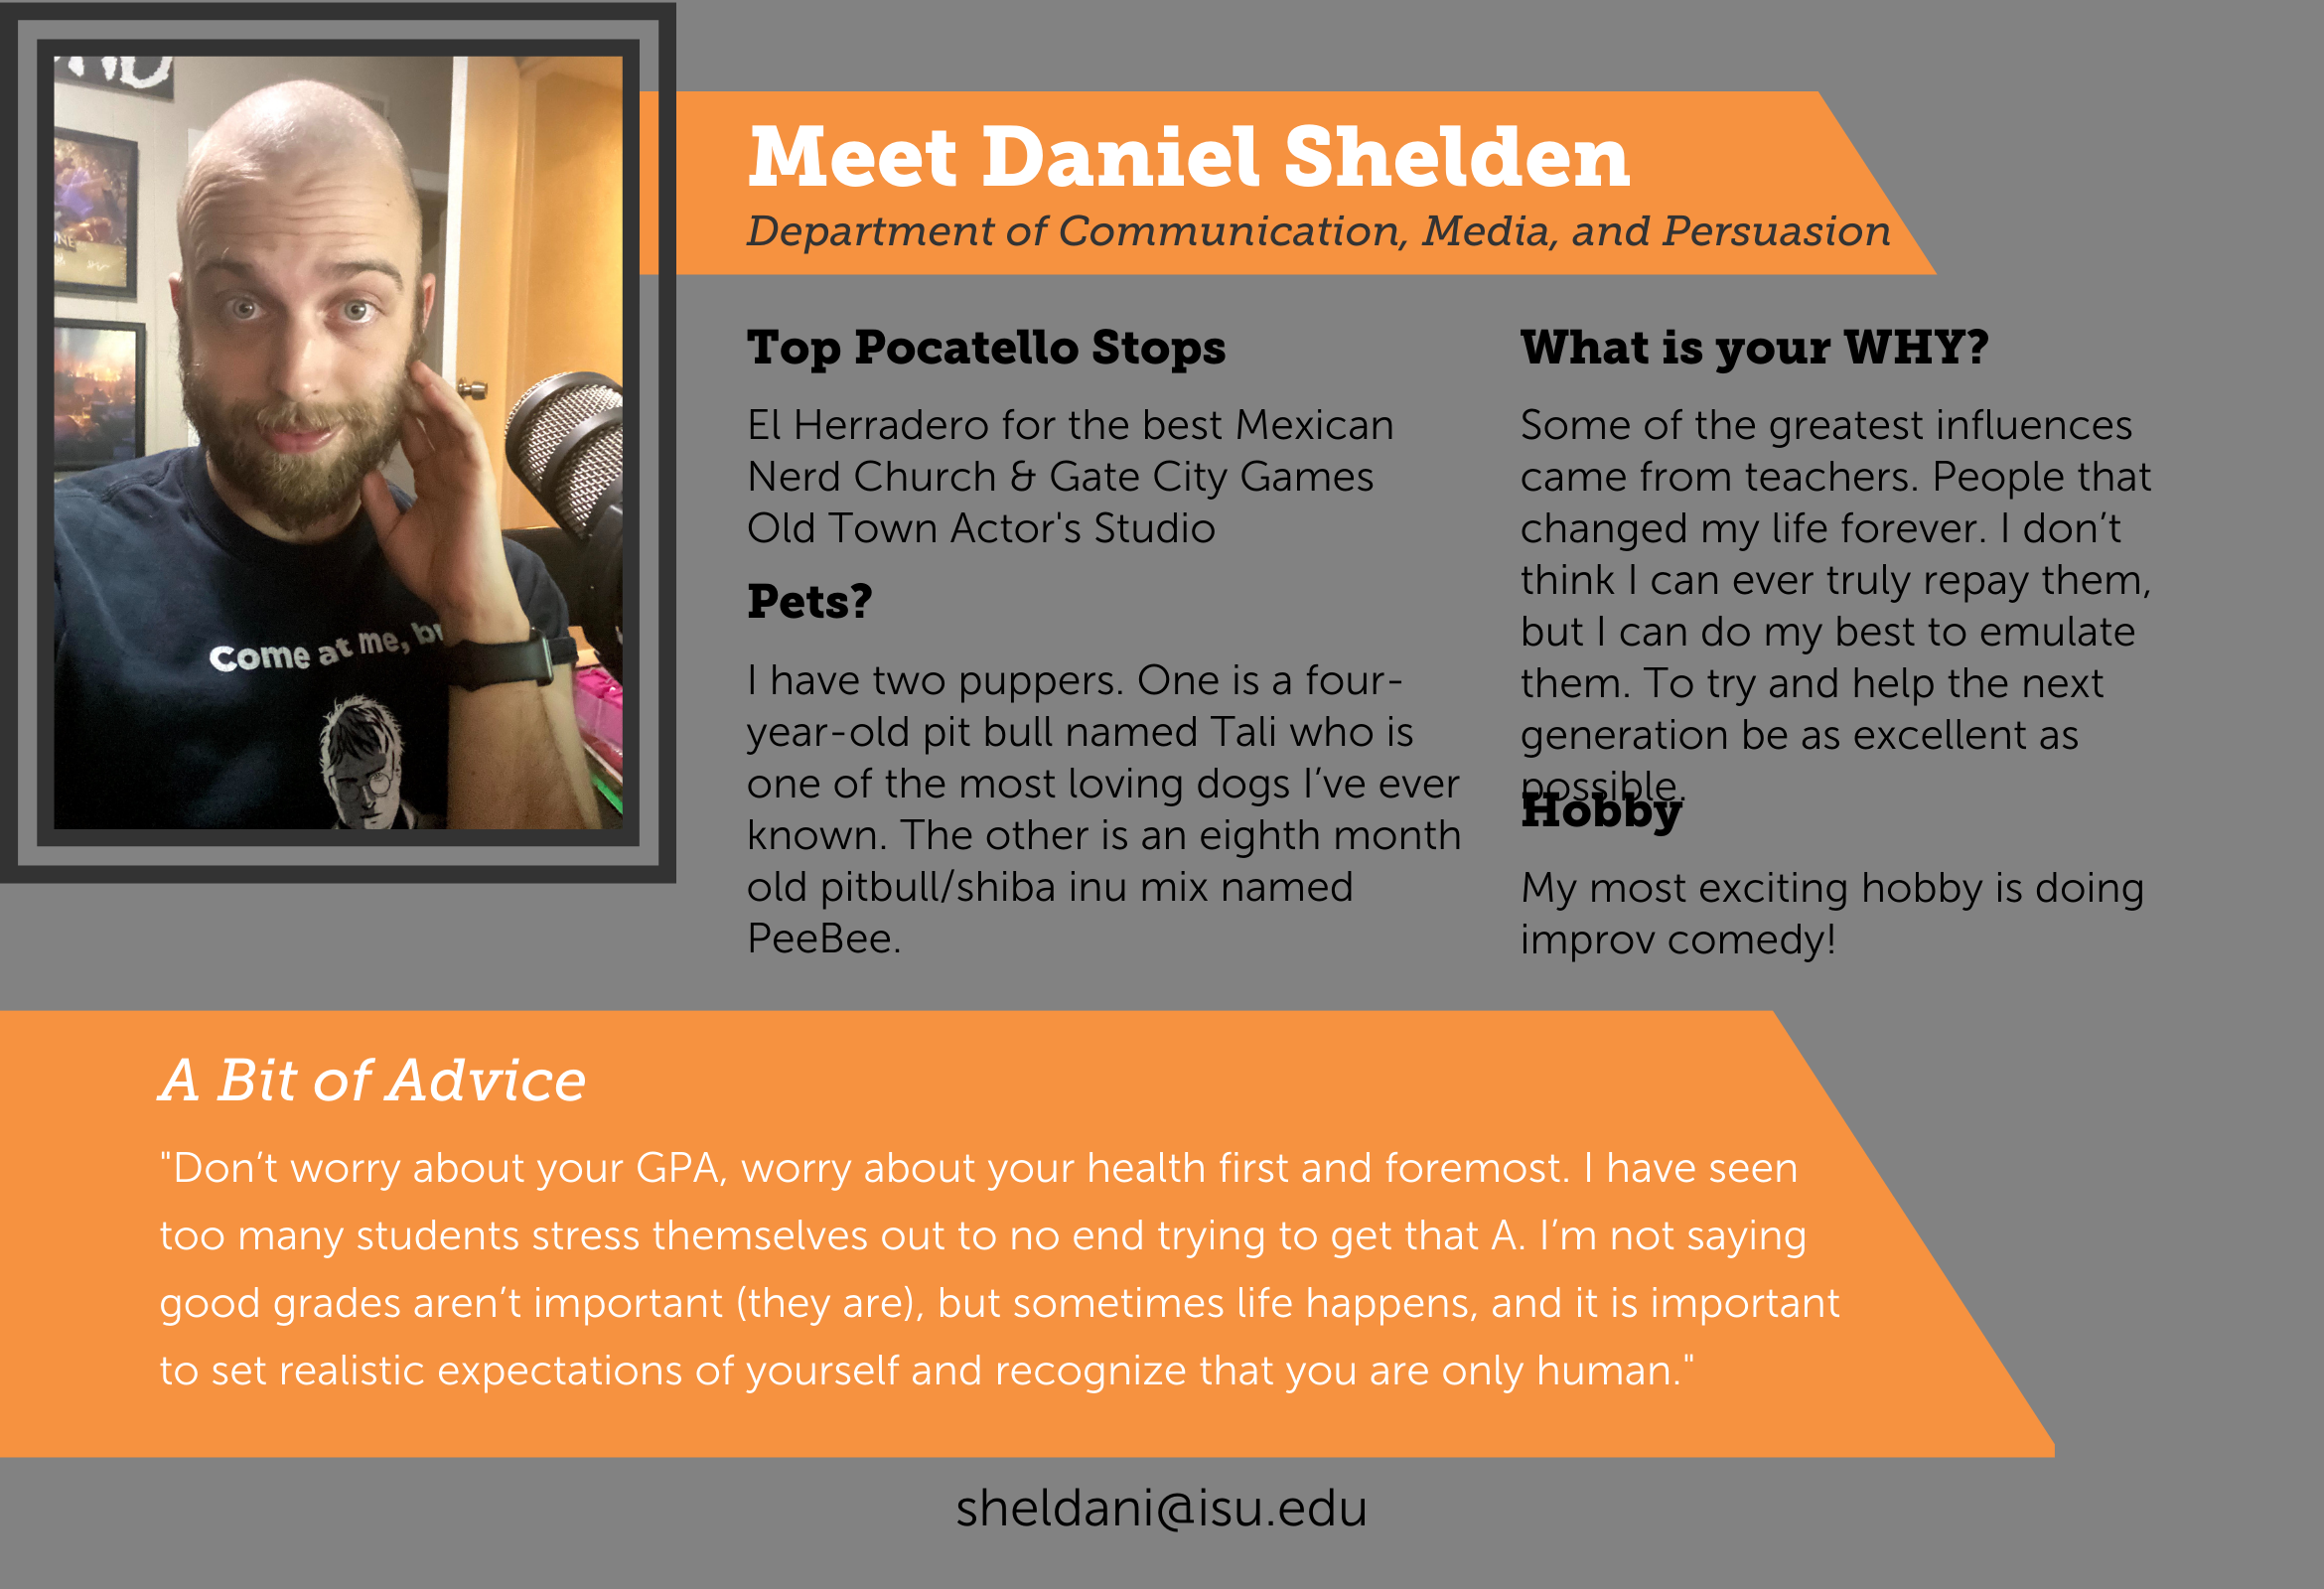 Meet Daniel Shelden, an assistant lecturer of communication, media, and persuasion. Shelden does improv comedy weekly. For the best Mexican food, he suggests El Herradero. Some of his greater influencers were teachers, and he strives to do the same for his students. Shelden's advice to new students is to not worry about your GPA, put your health first and set realistic expectations of yourself.